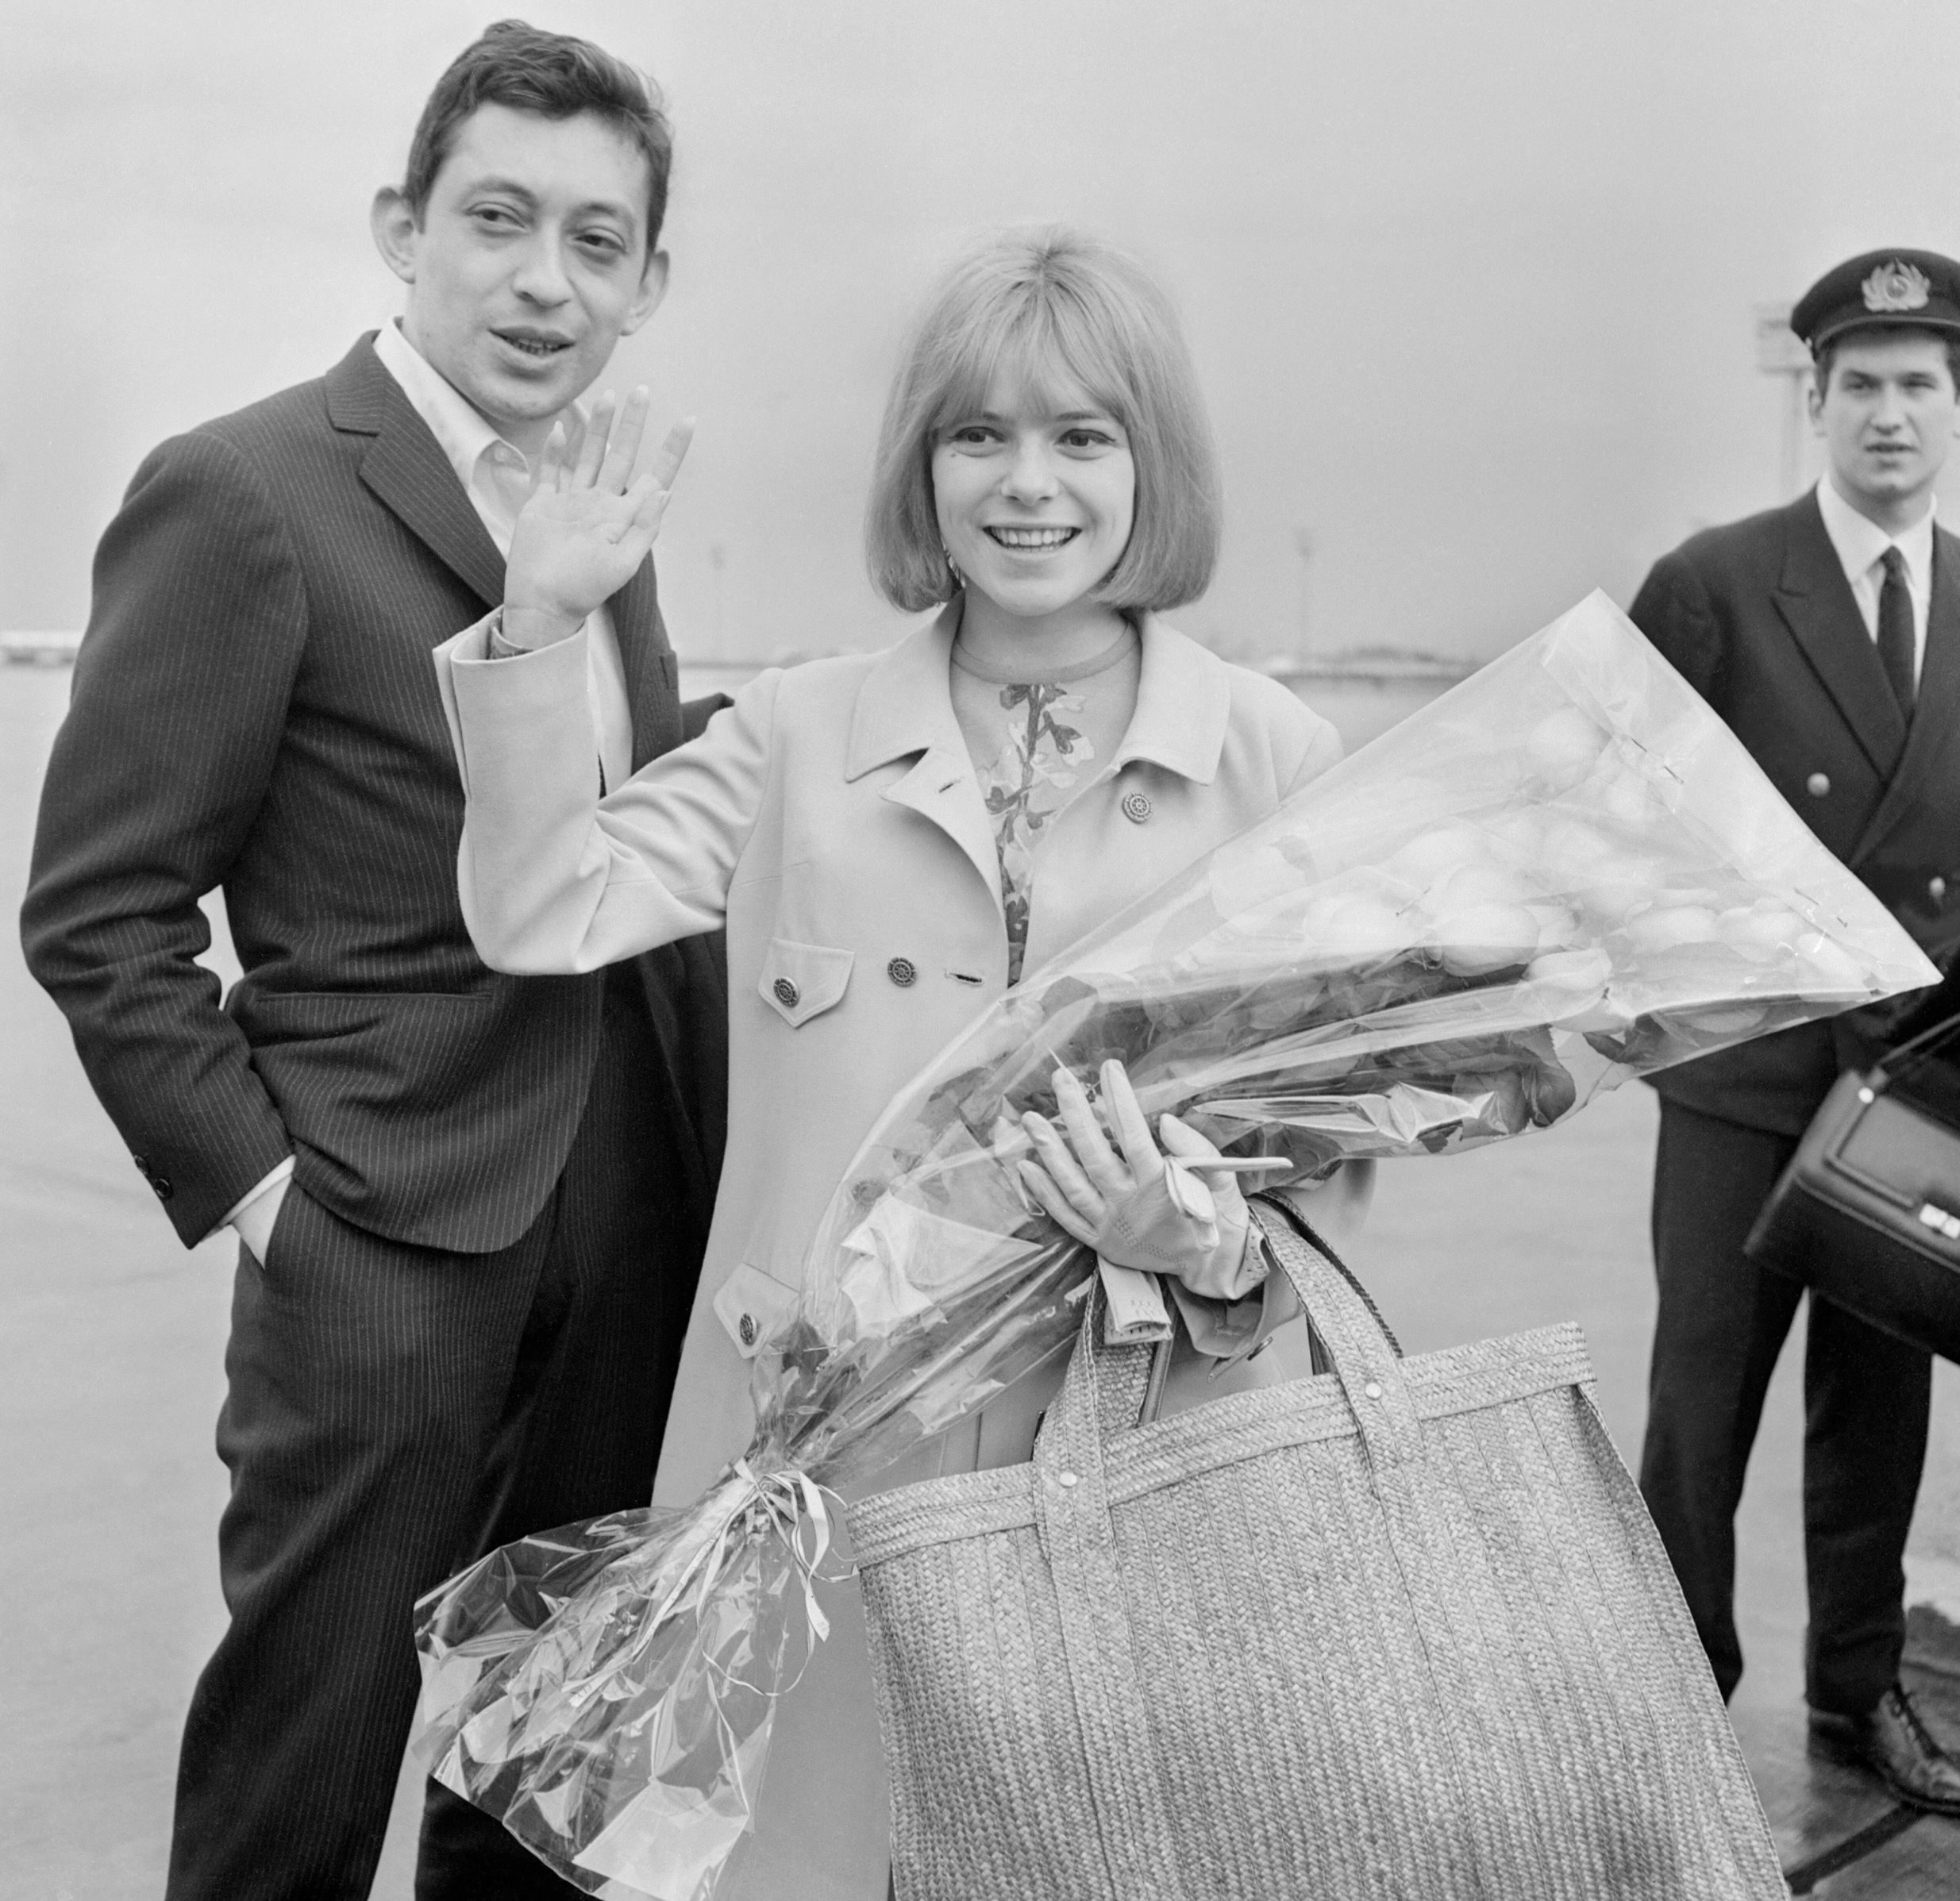 (FILES) In this file photo taken on March 21, 1965 French singer France Gall waves to fans next to singer-songwriter Serge Gainsbourg, upon her arrival at Orly airport a day after she won the 1965 Eurovision Song contest with 